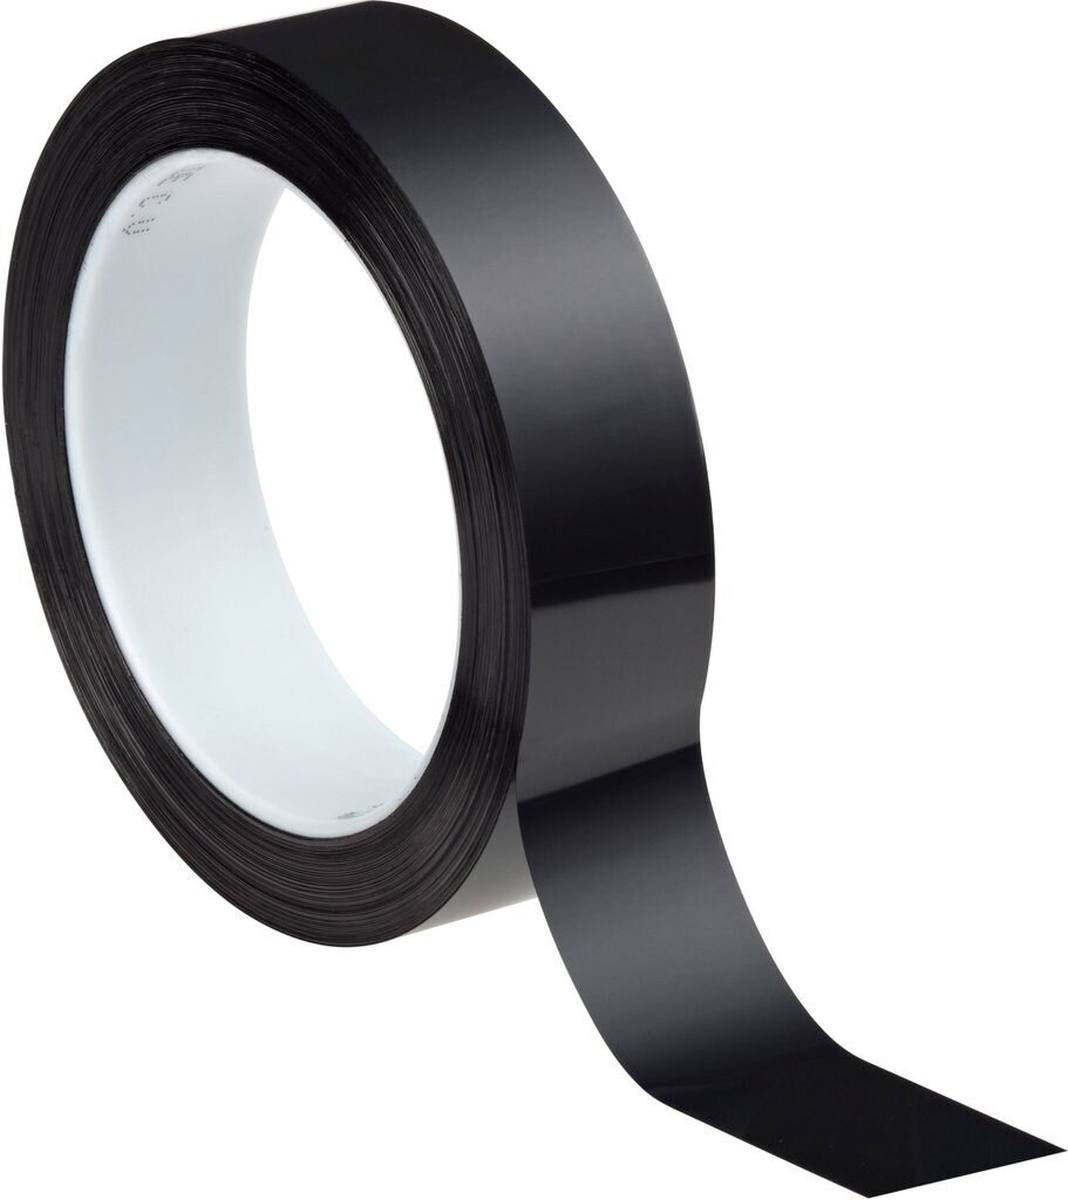 3M polyester adhesive tape 850 T, transparent, 12 mm x 66 m, 0.05 mm